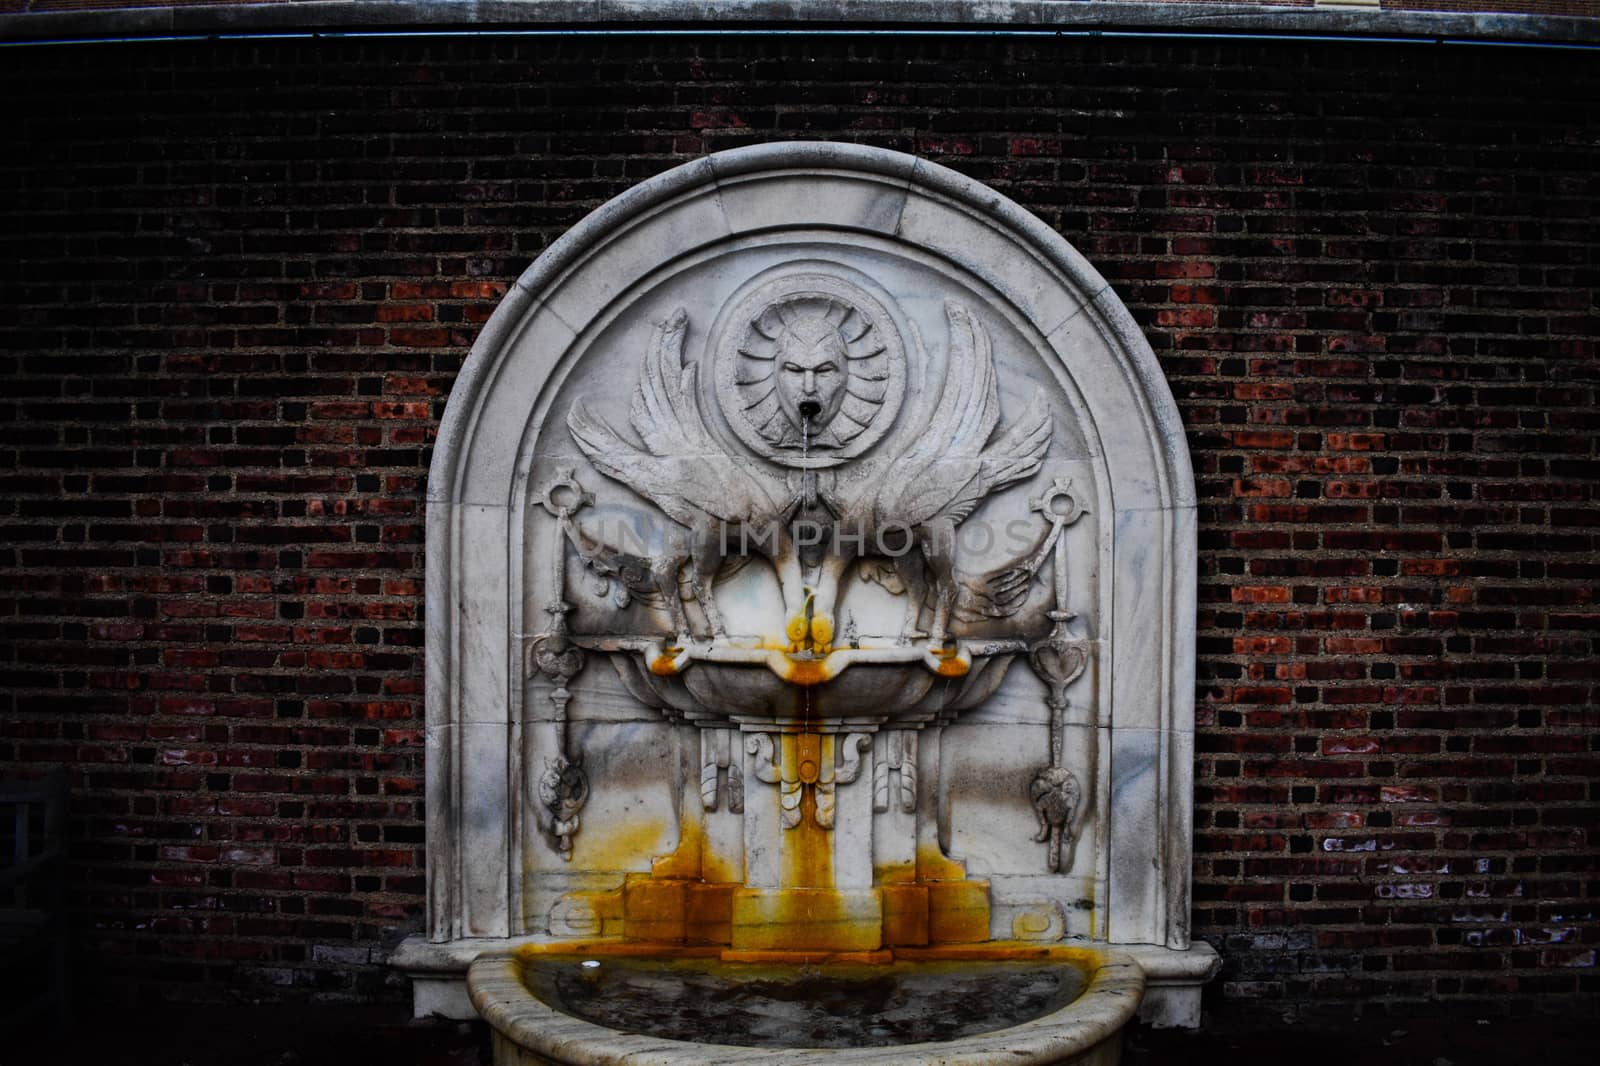 An Ornate Fountain With Rust Stains From Years of Use by bju12290